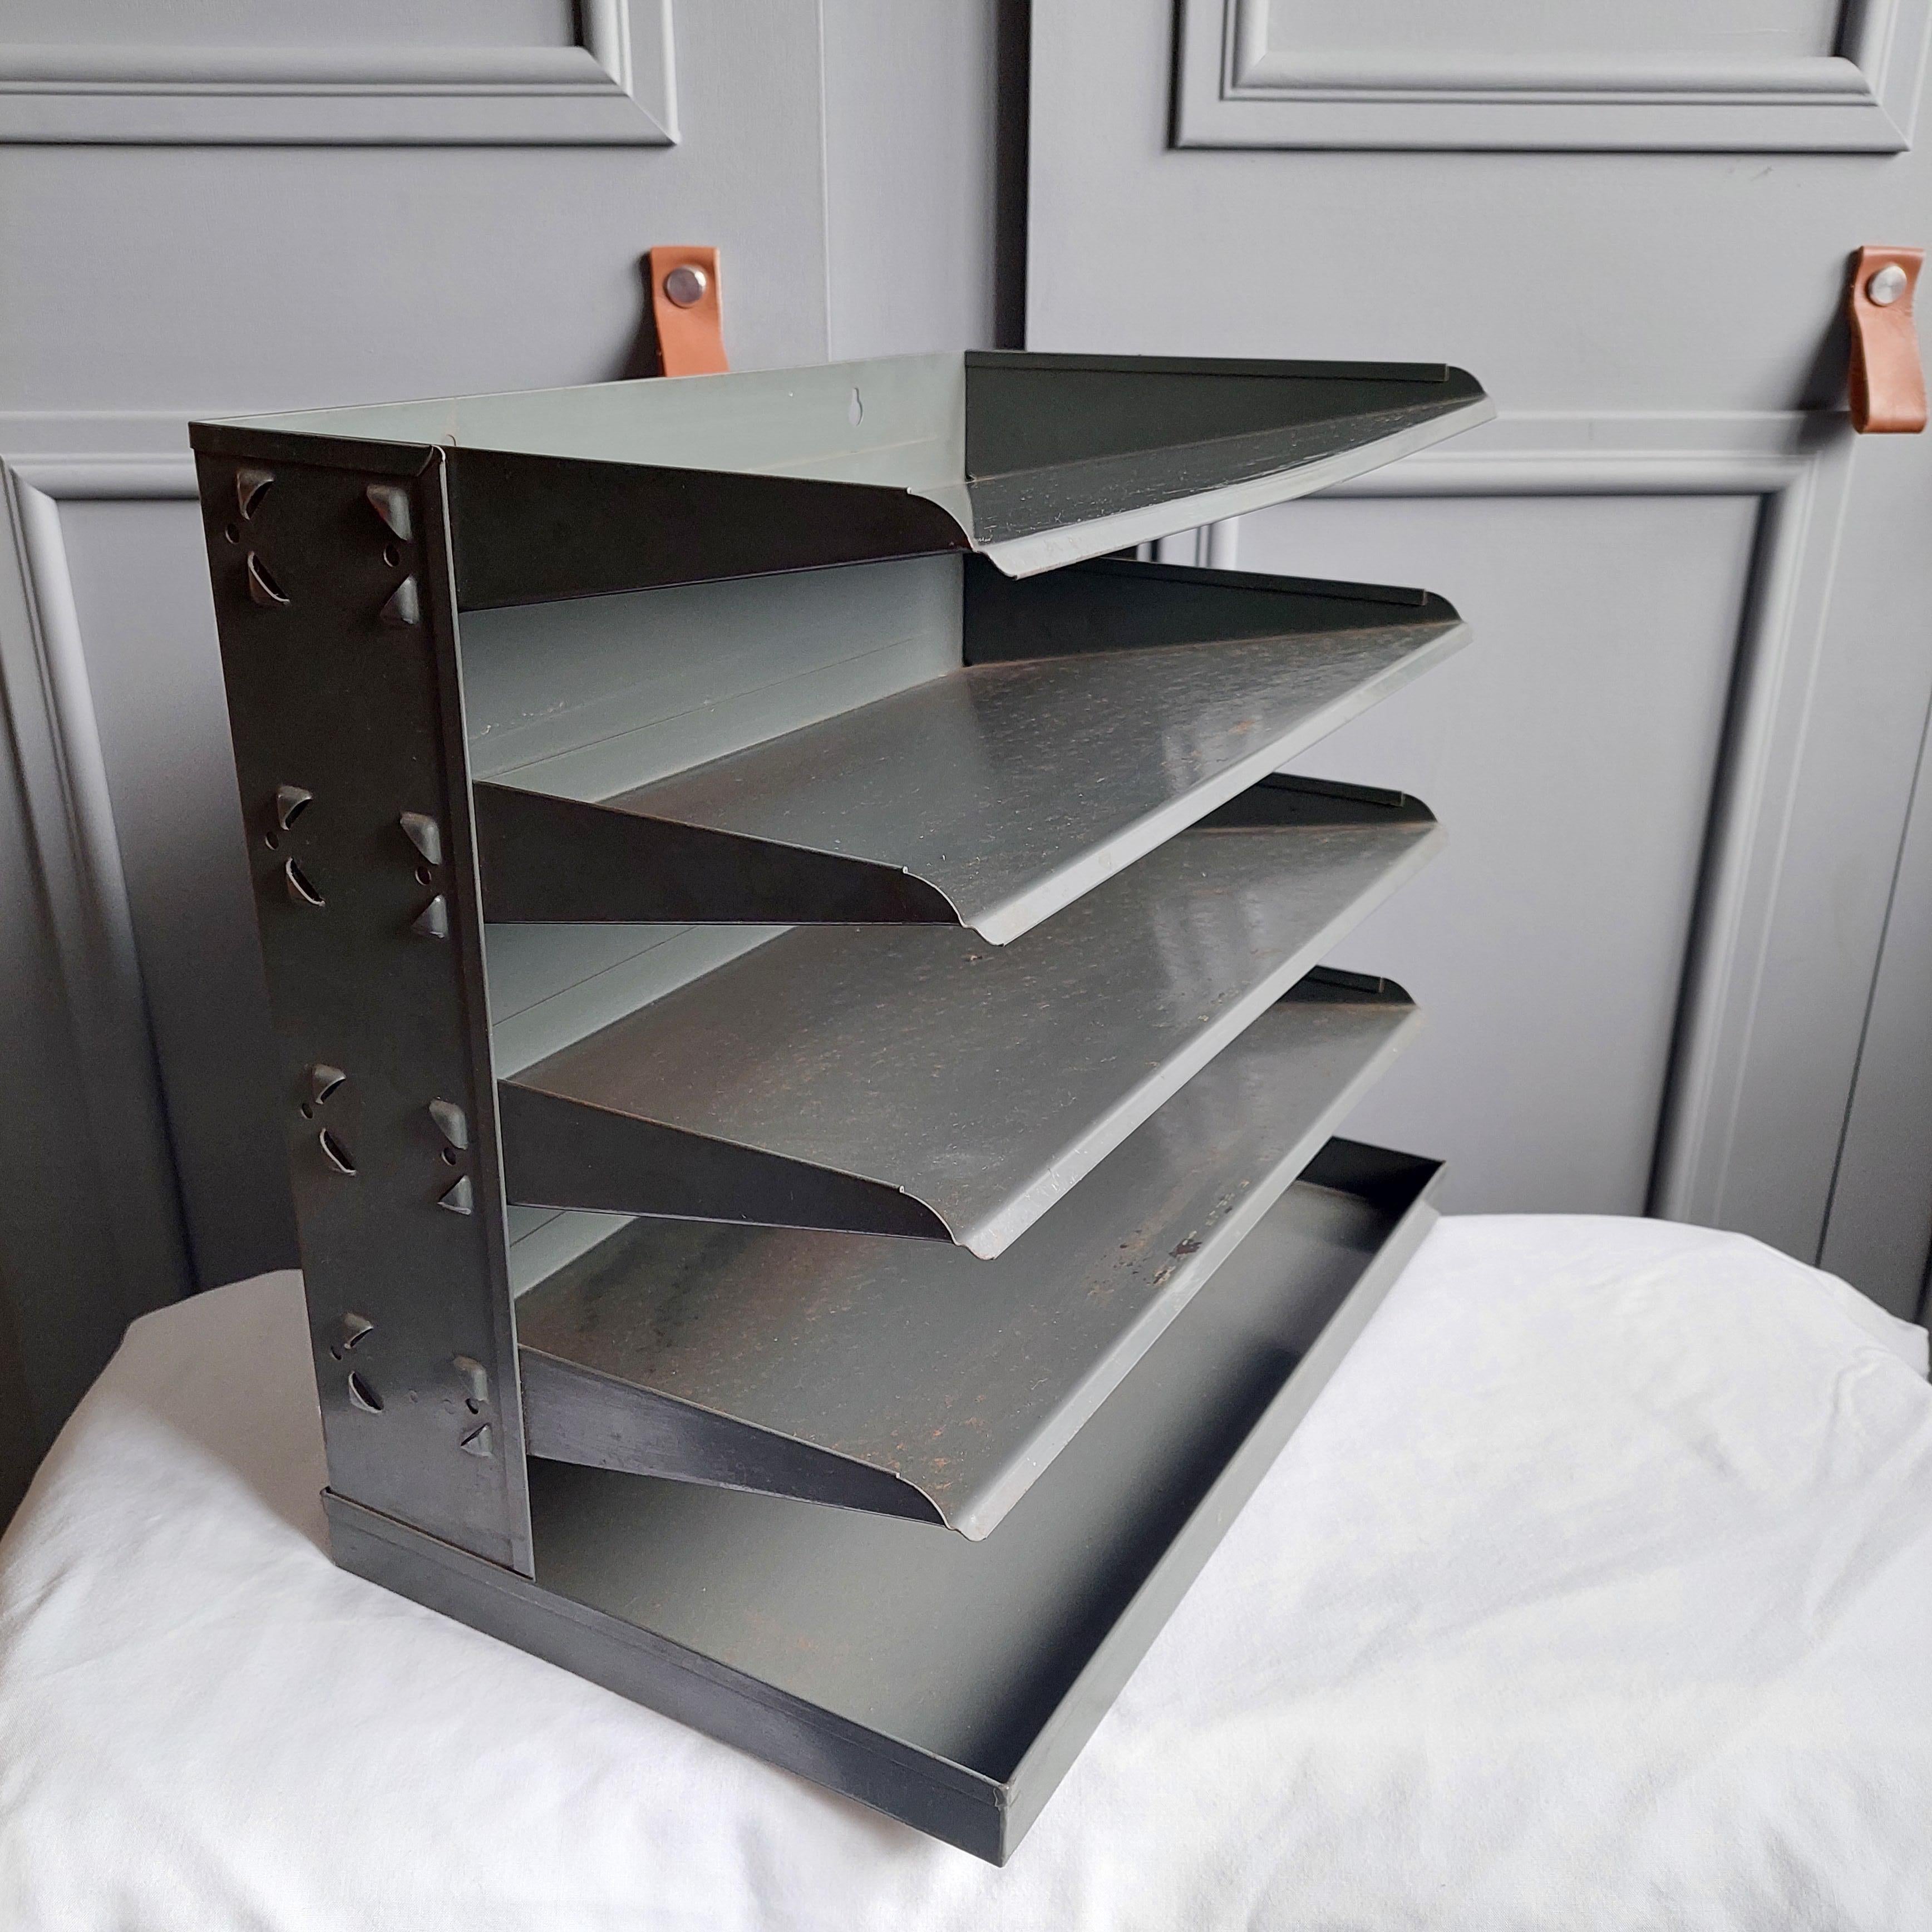 Vintage tiered metal filing tray, from the 1940’s - 1950’s. 
A Sophisticated Grey and Stylish Design Filing Tray. 

Can be either free standing on a desk, or wall mounted. 
Likely to have been used in a military setting.
filing open tray cabinet